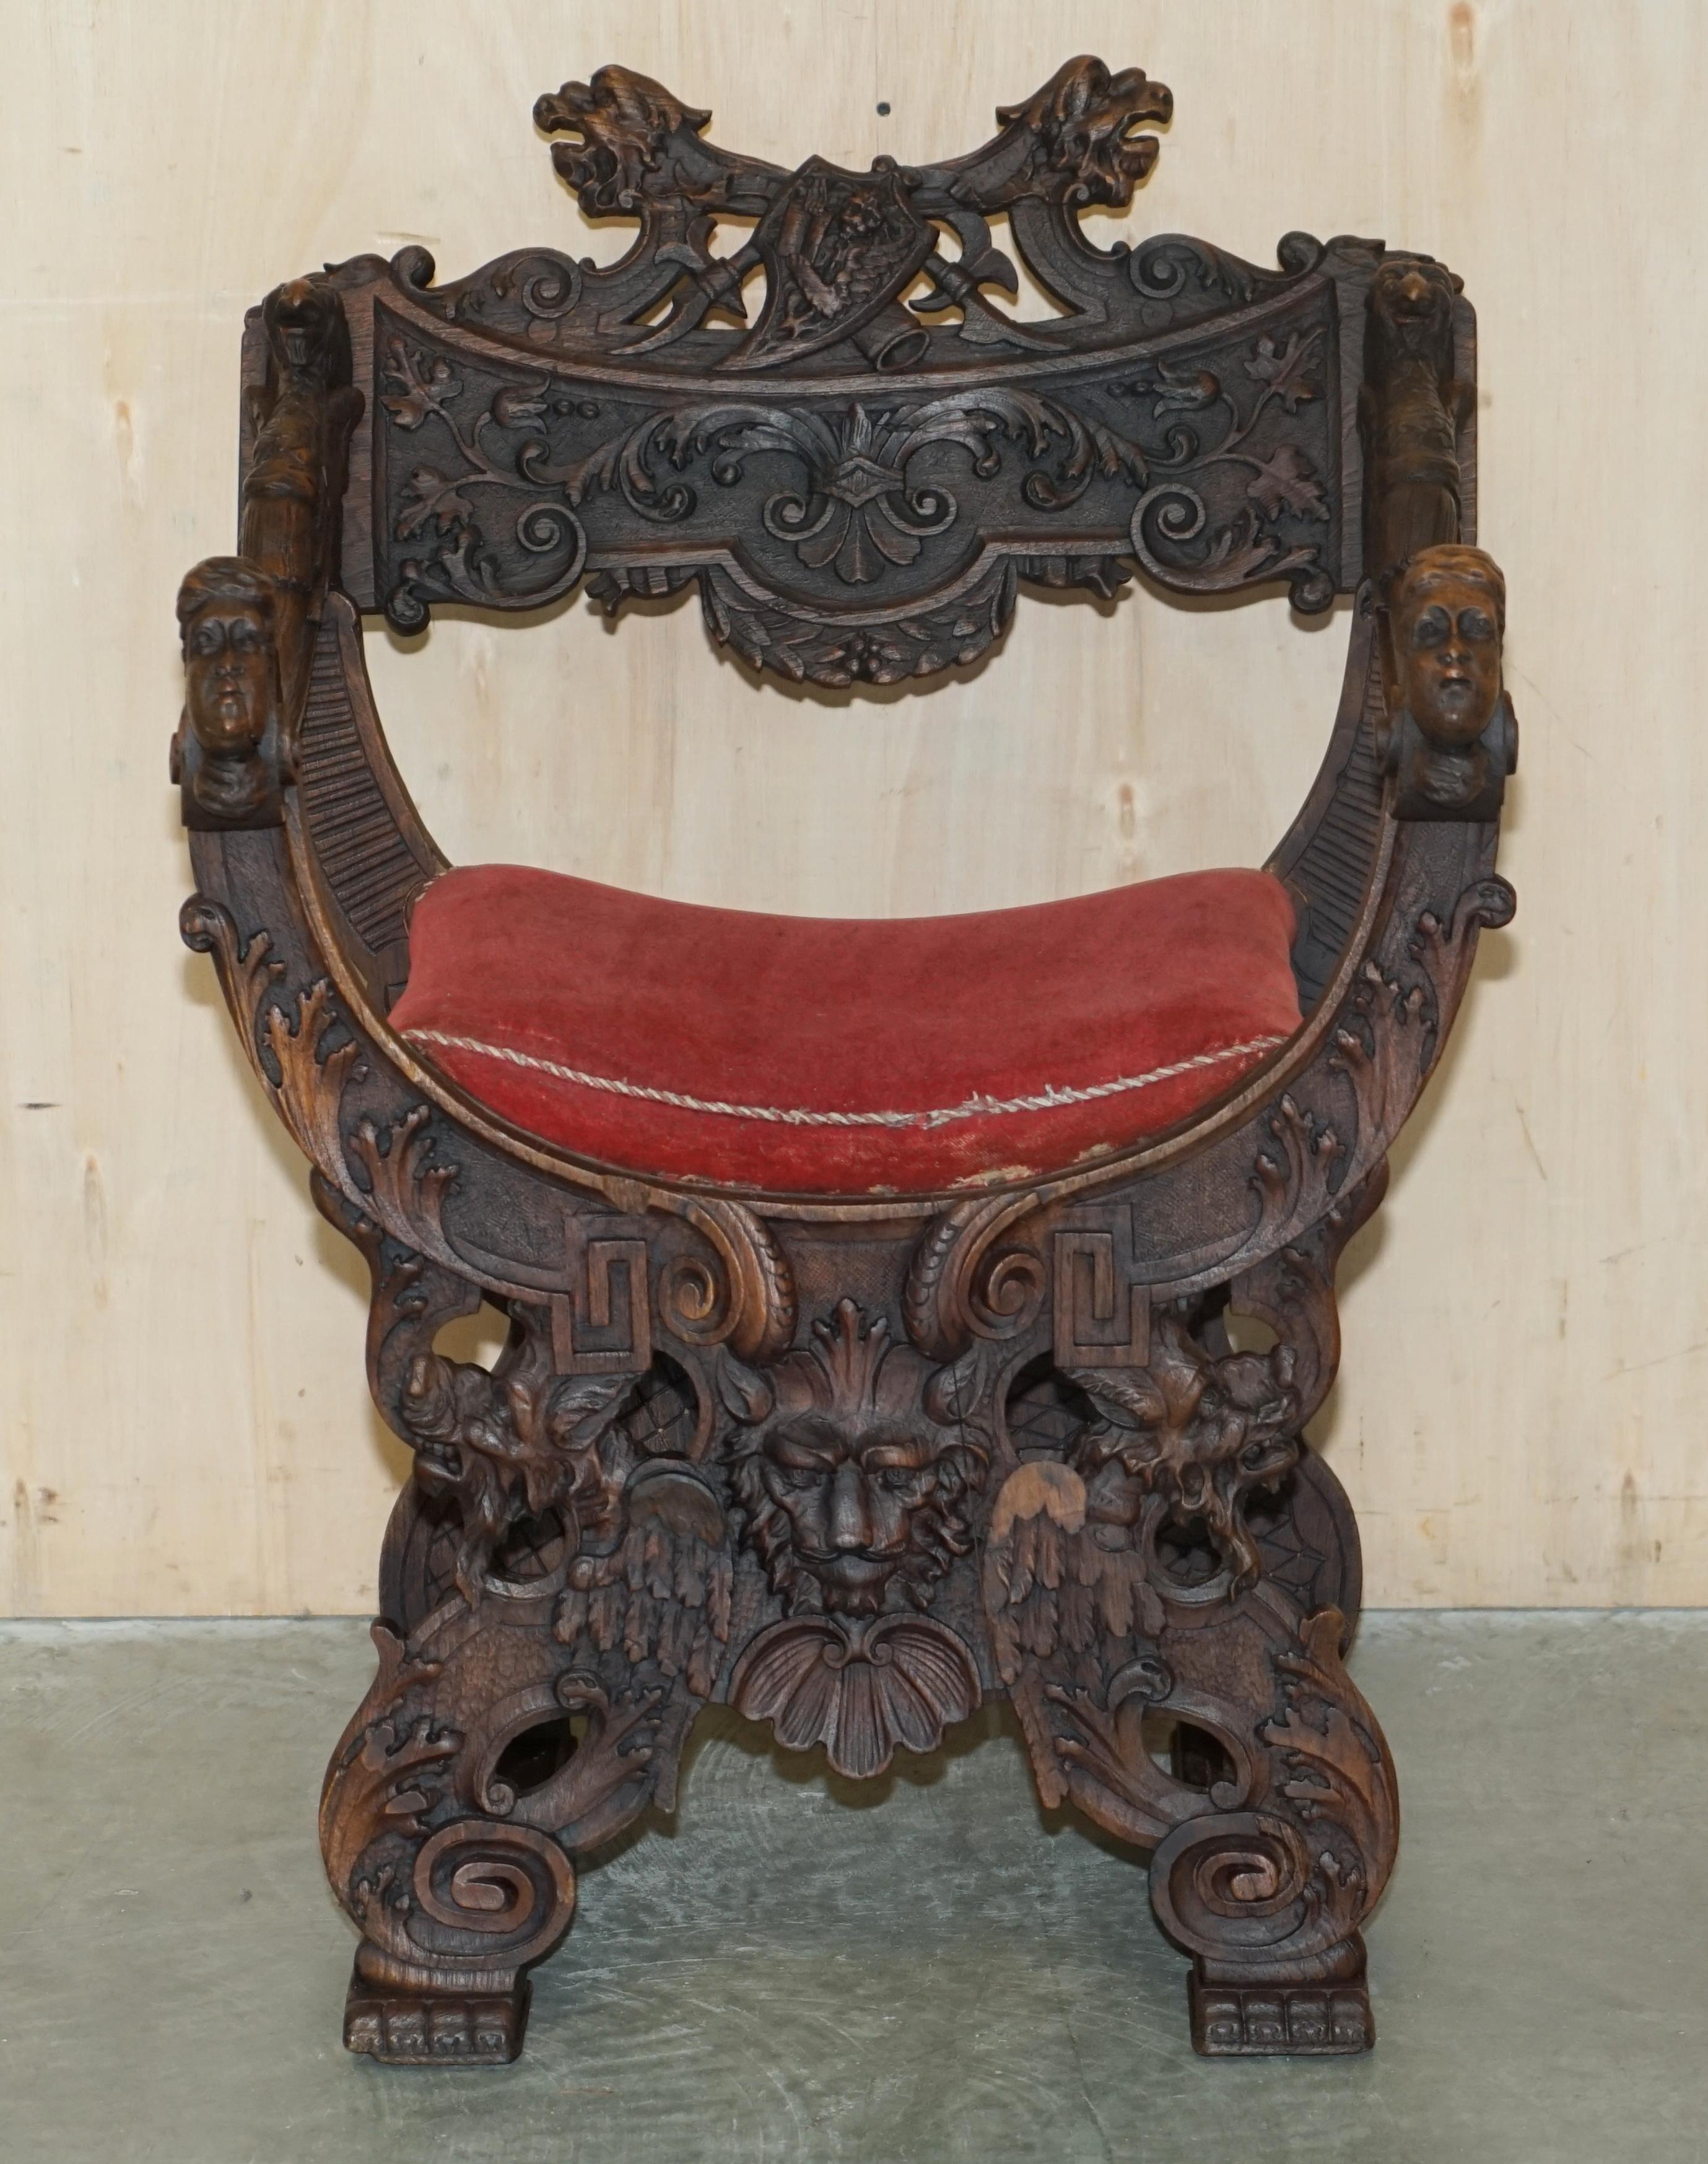 We are delighted to offer for sale this stunning original 19th century hand carved Italian walnut armchair with ornate detailing throughout 

This chair is absolutely stunning, its hand carved from head to toe, comes complete with the original